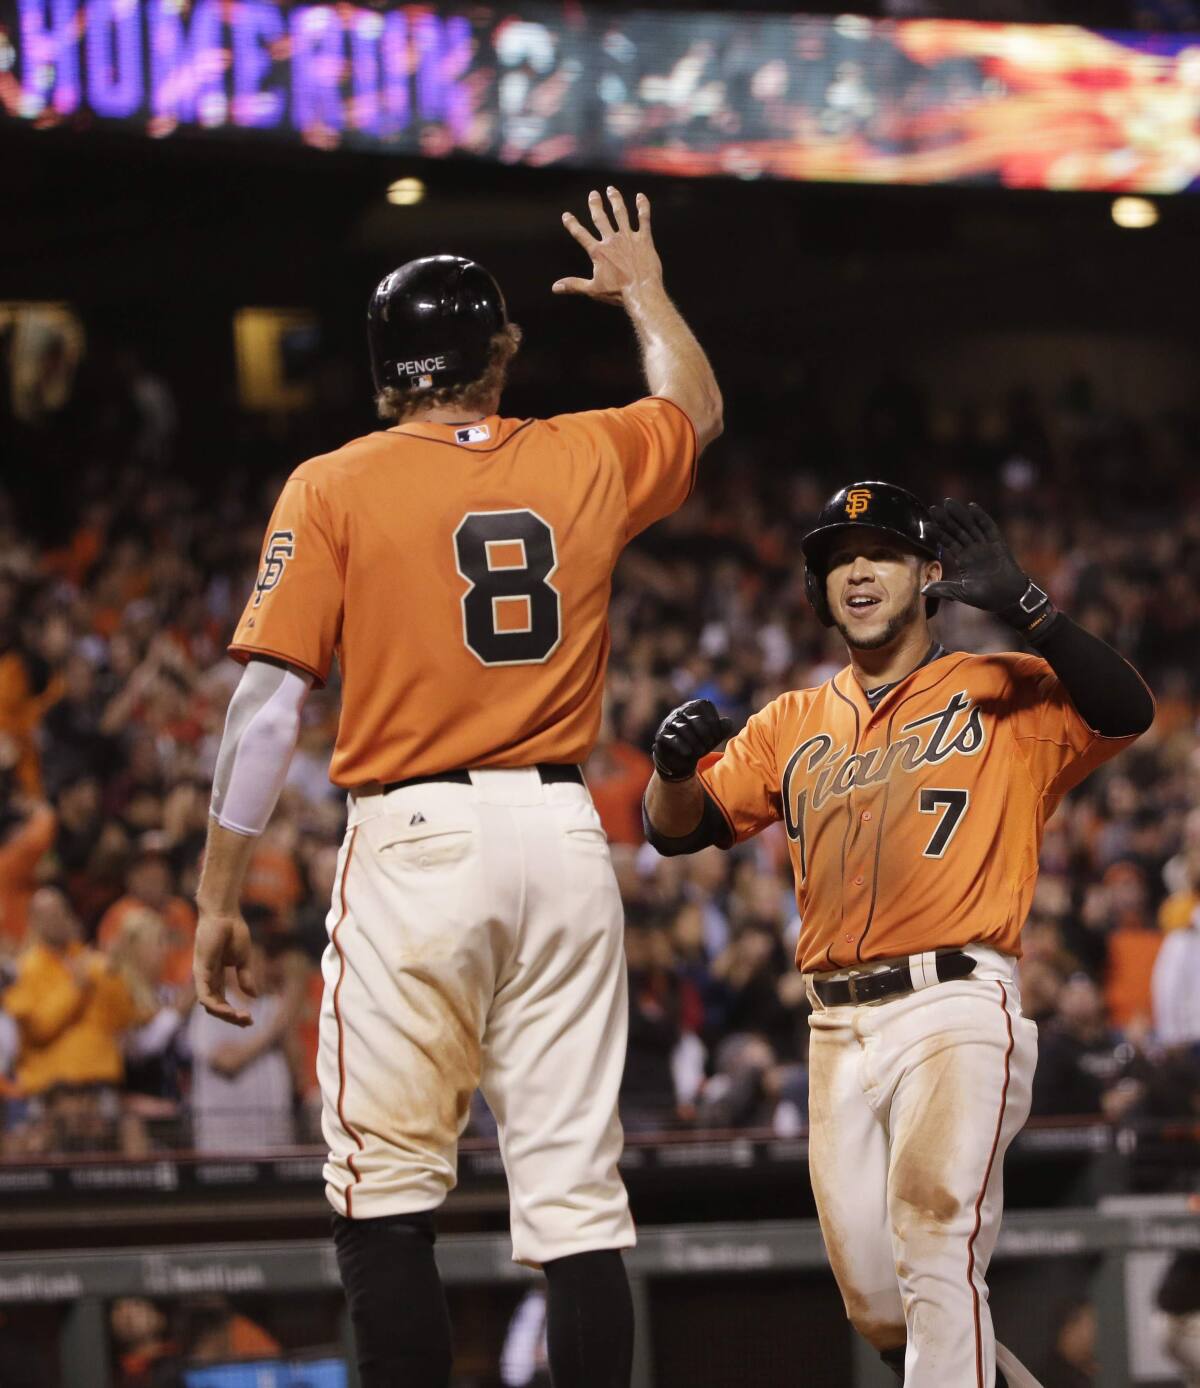 Buster Posey's big night sparks Giants' blowout win (w/video)